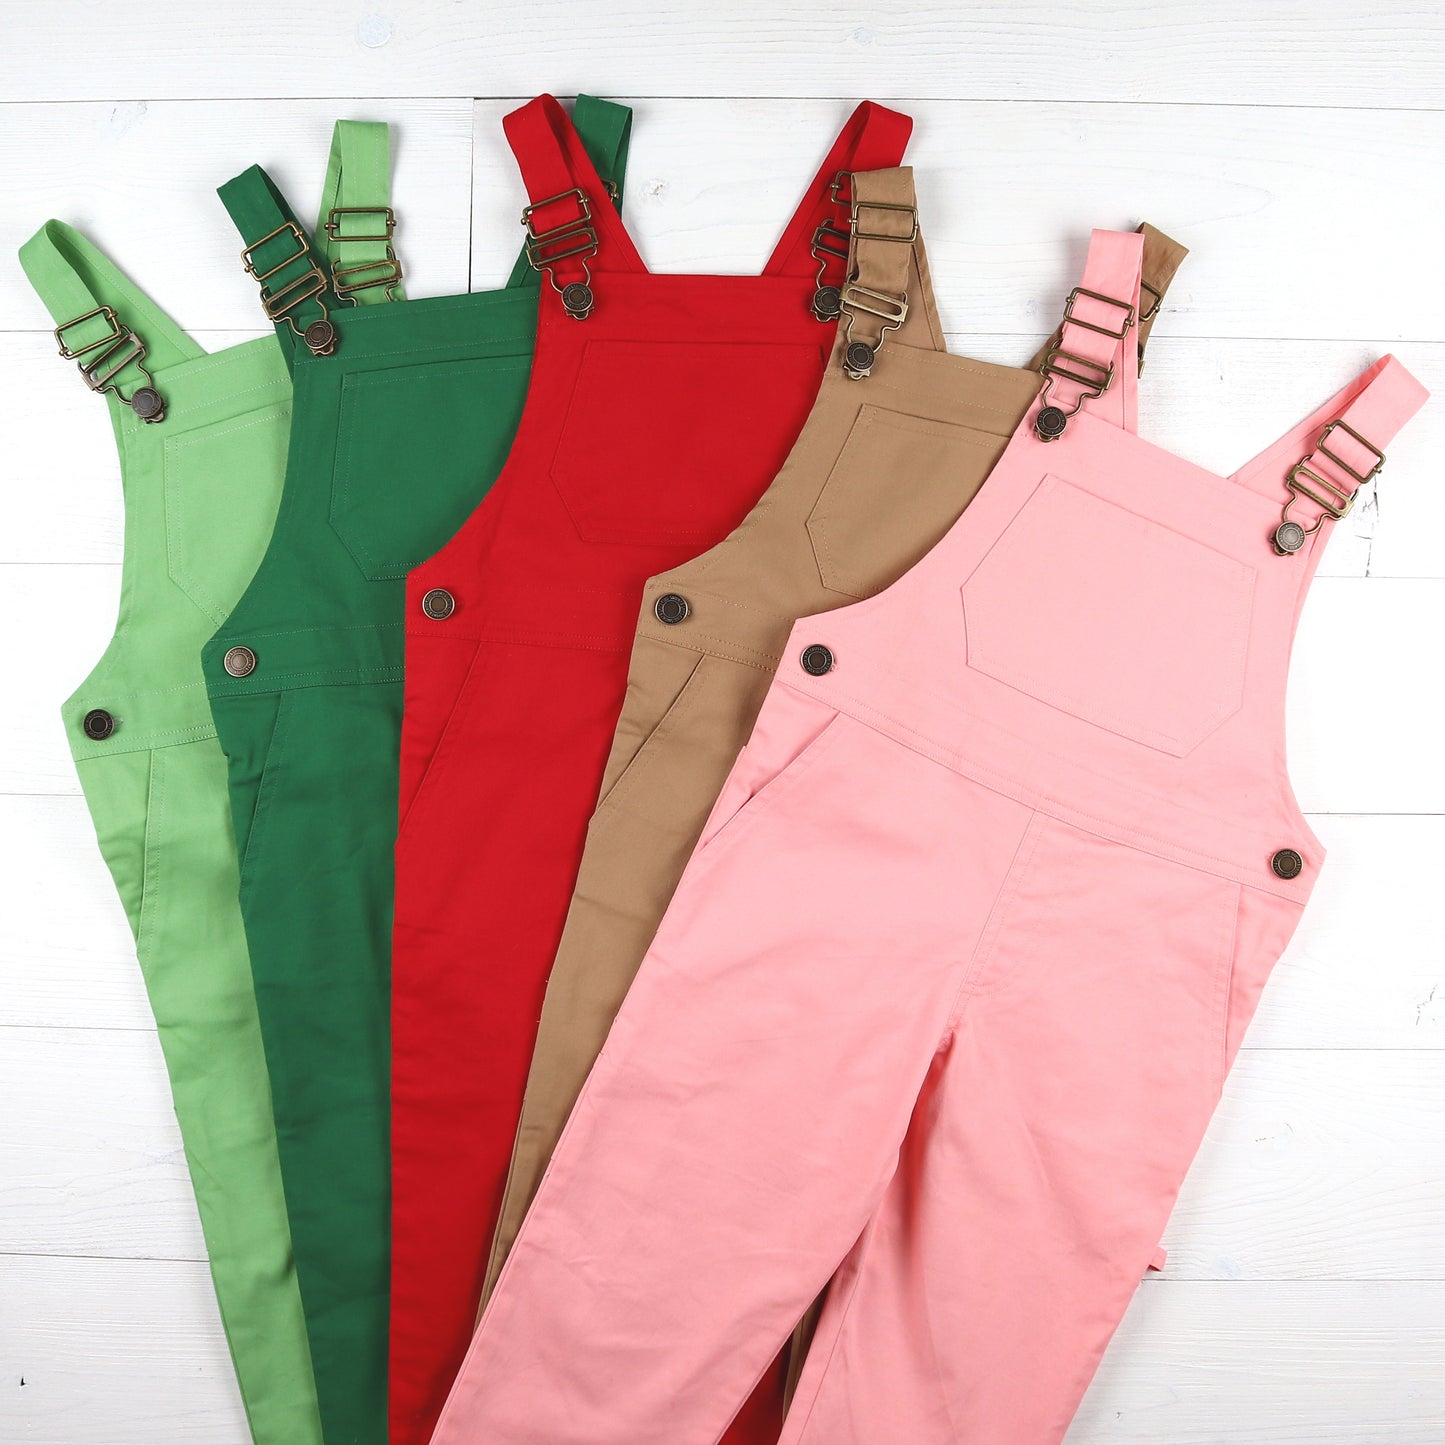 Red Twill Overalls